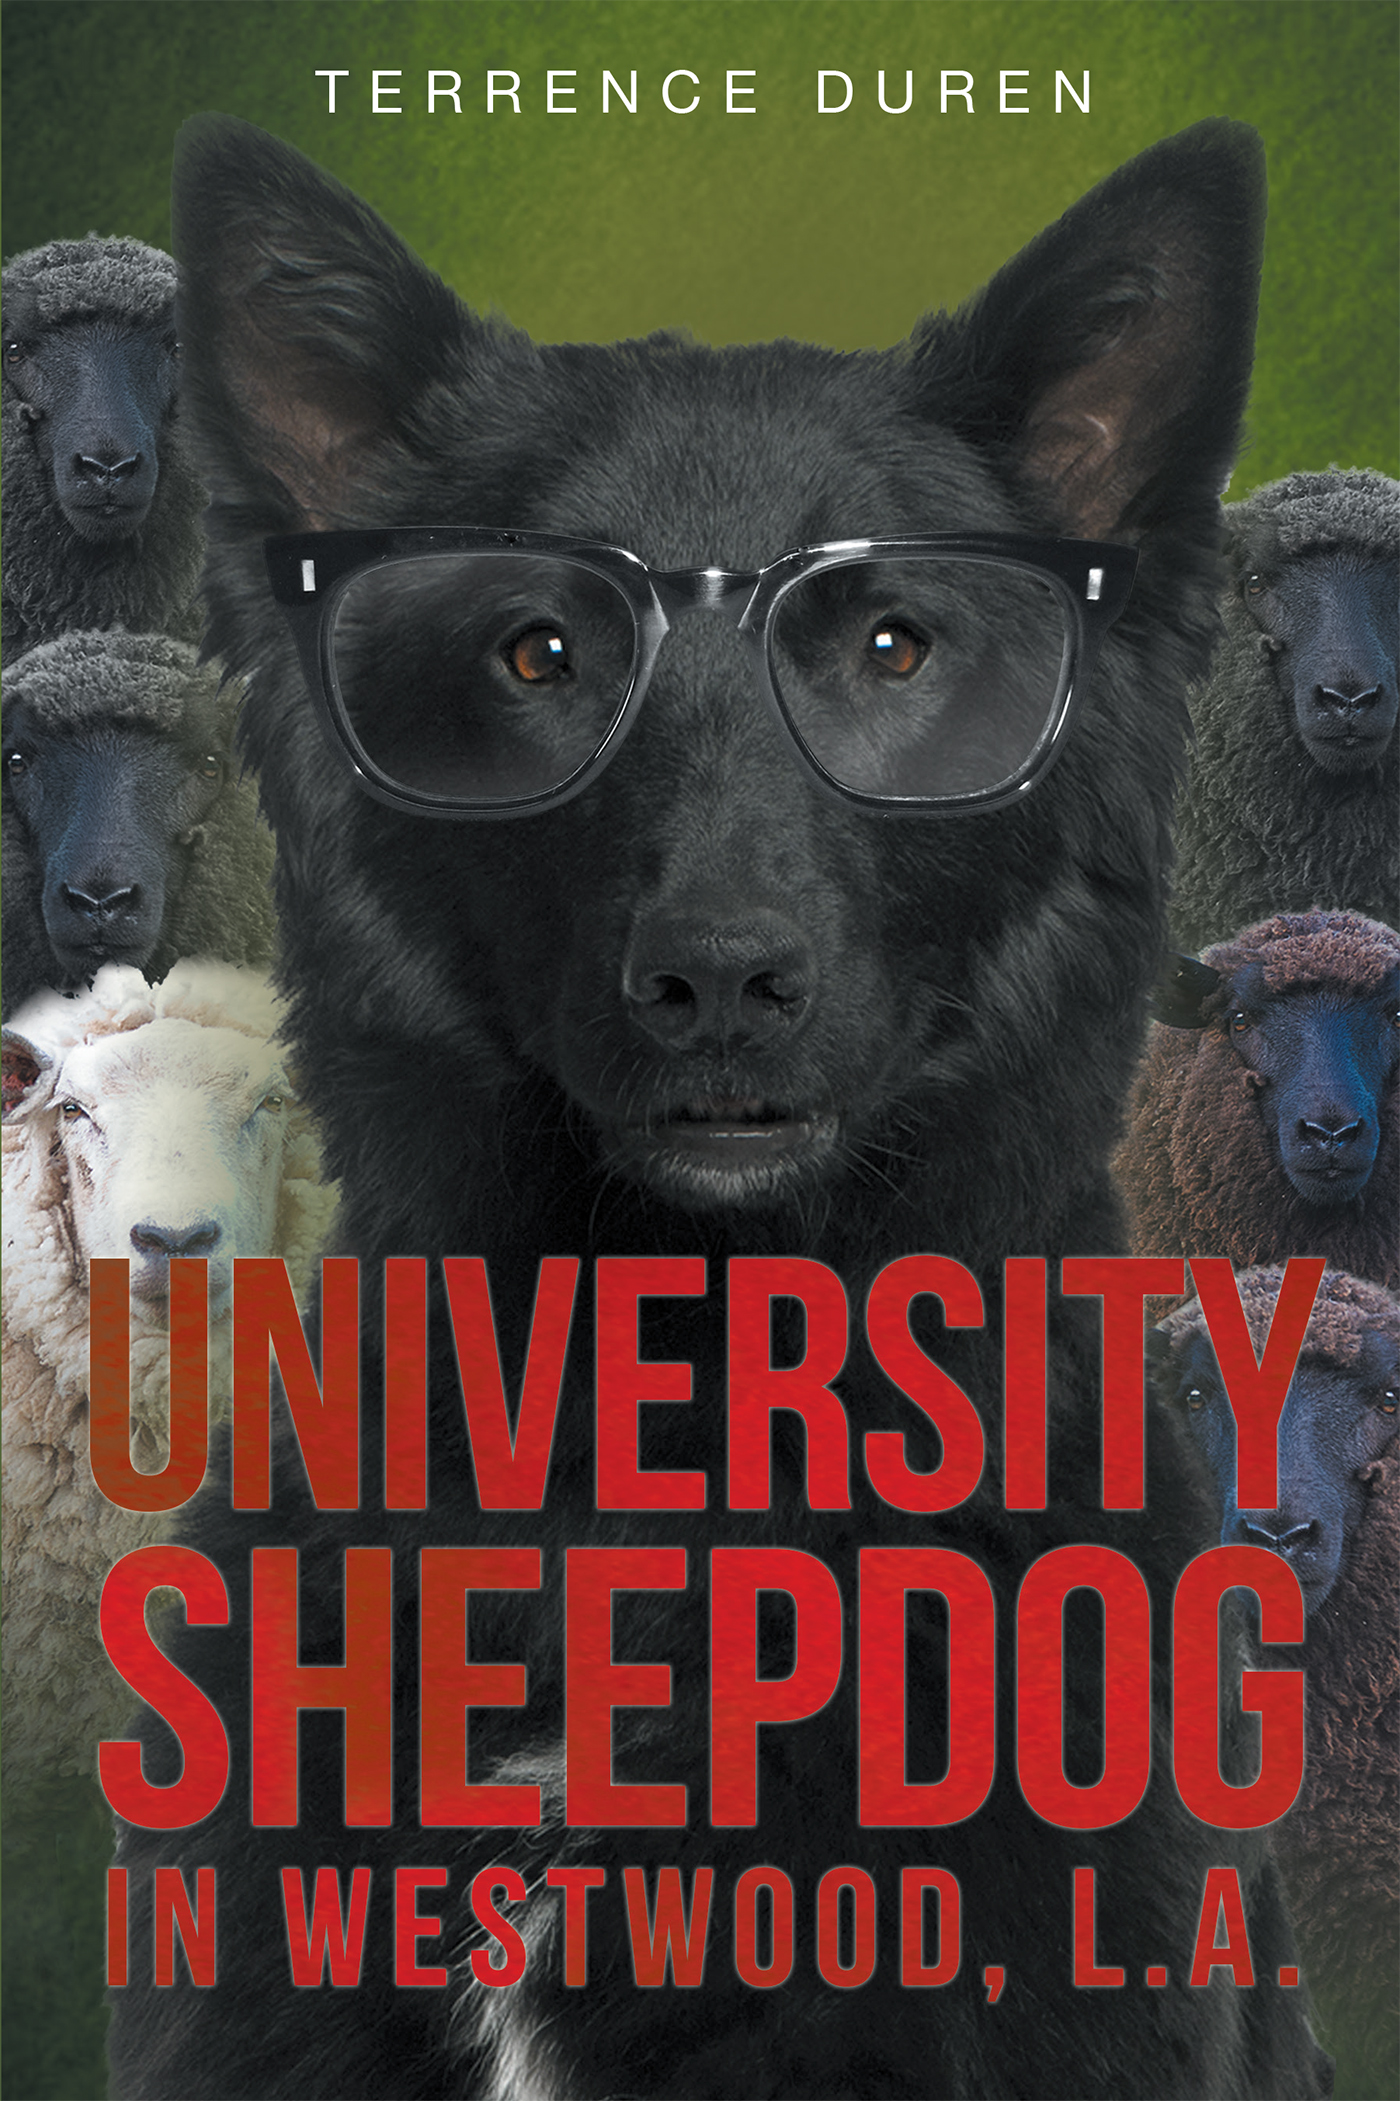 University Sheepdog in Westwood, L.A. Cover Image